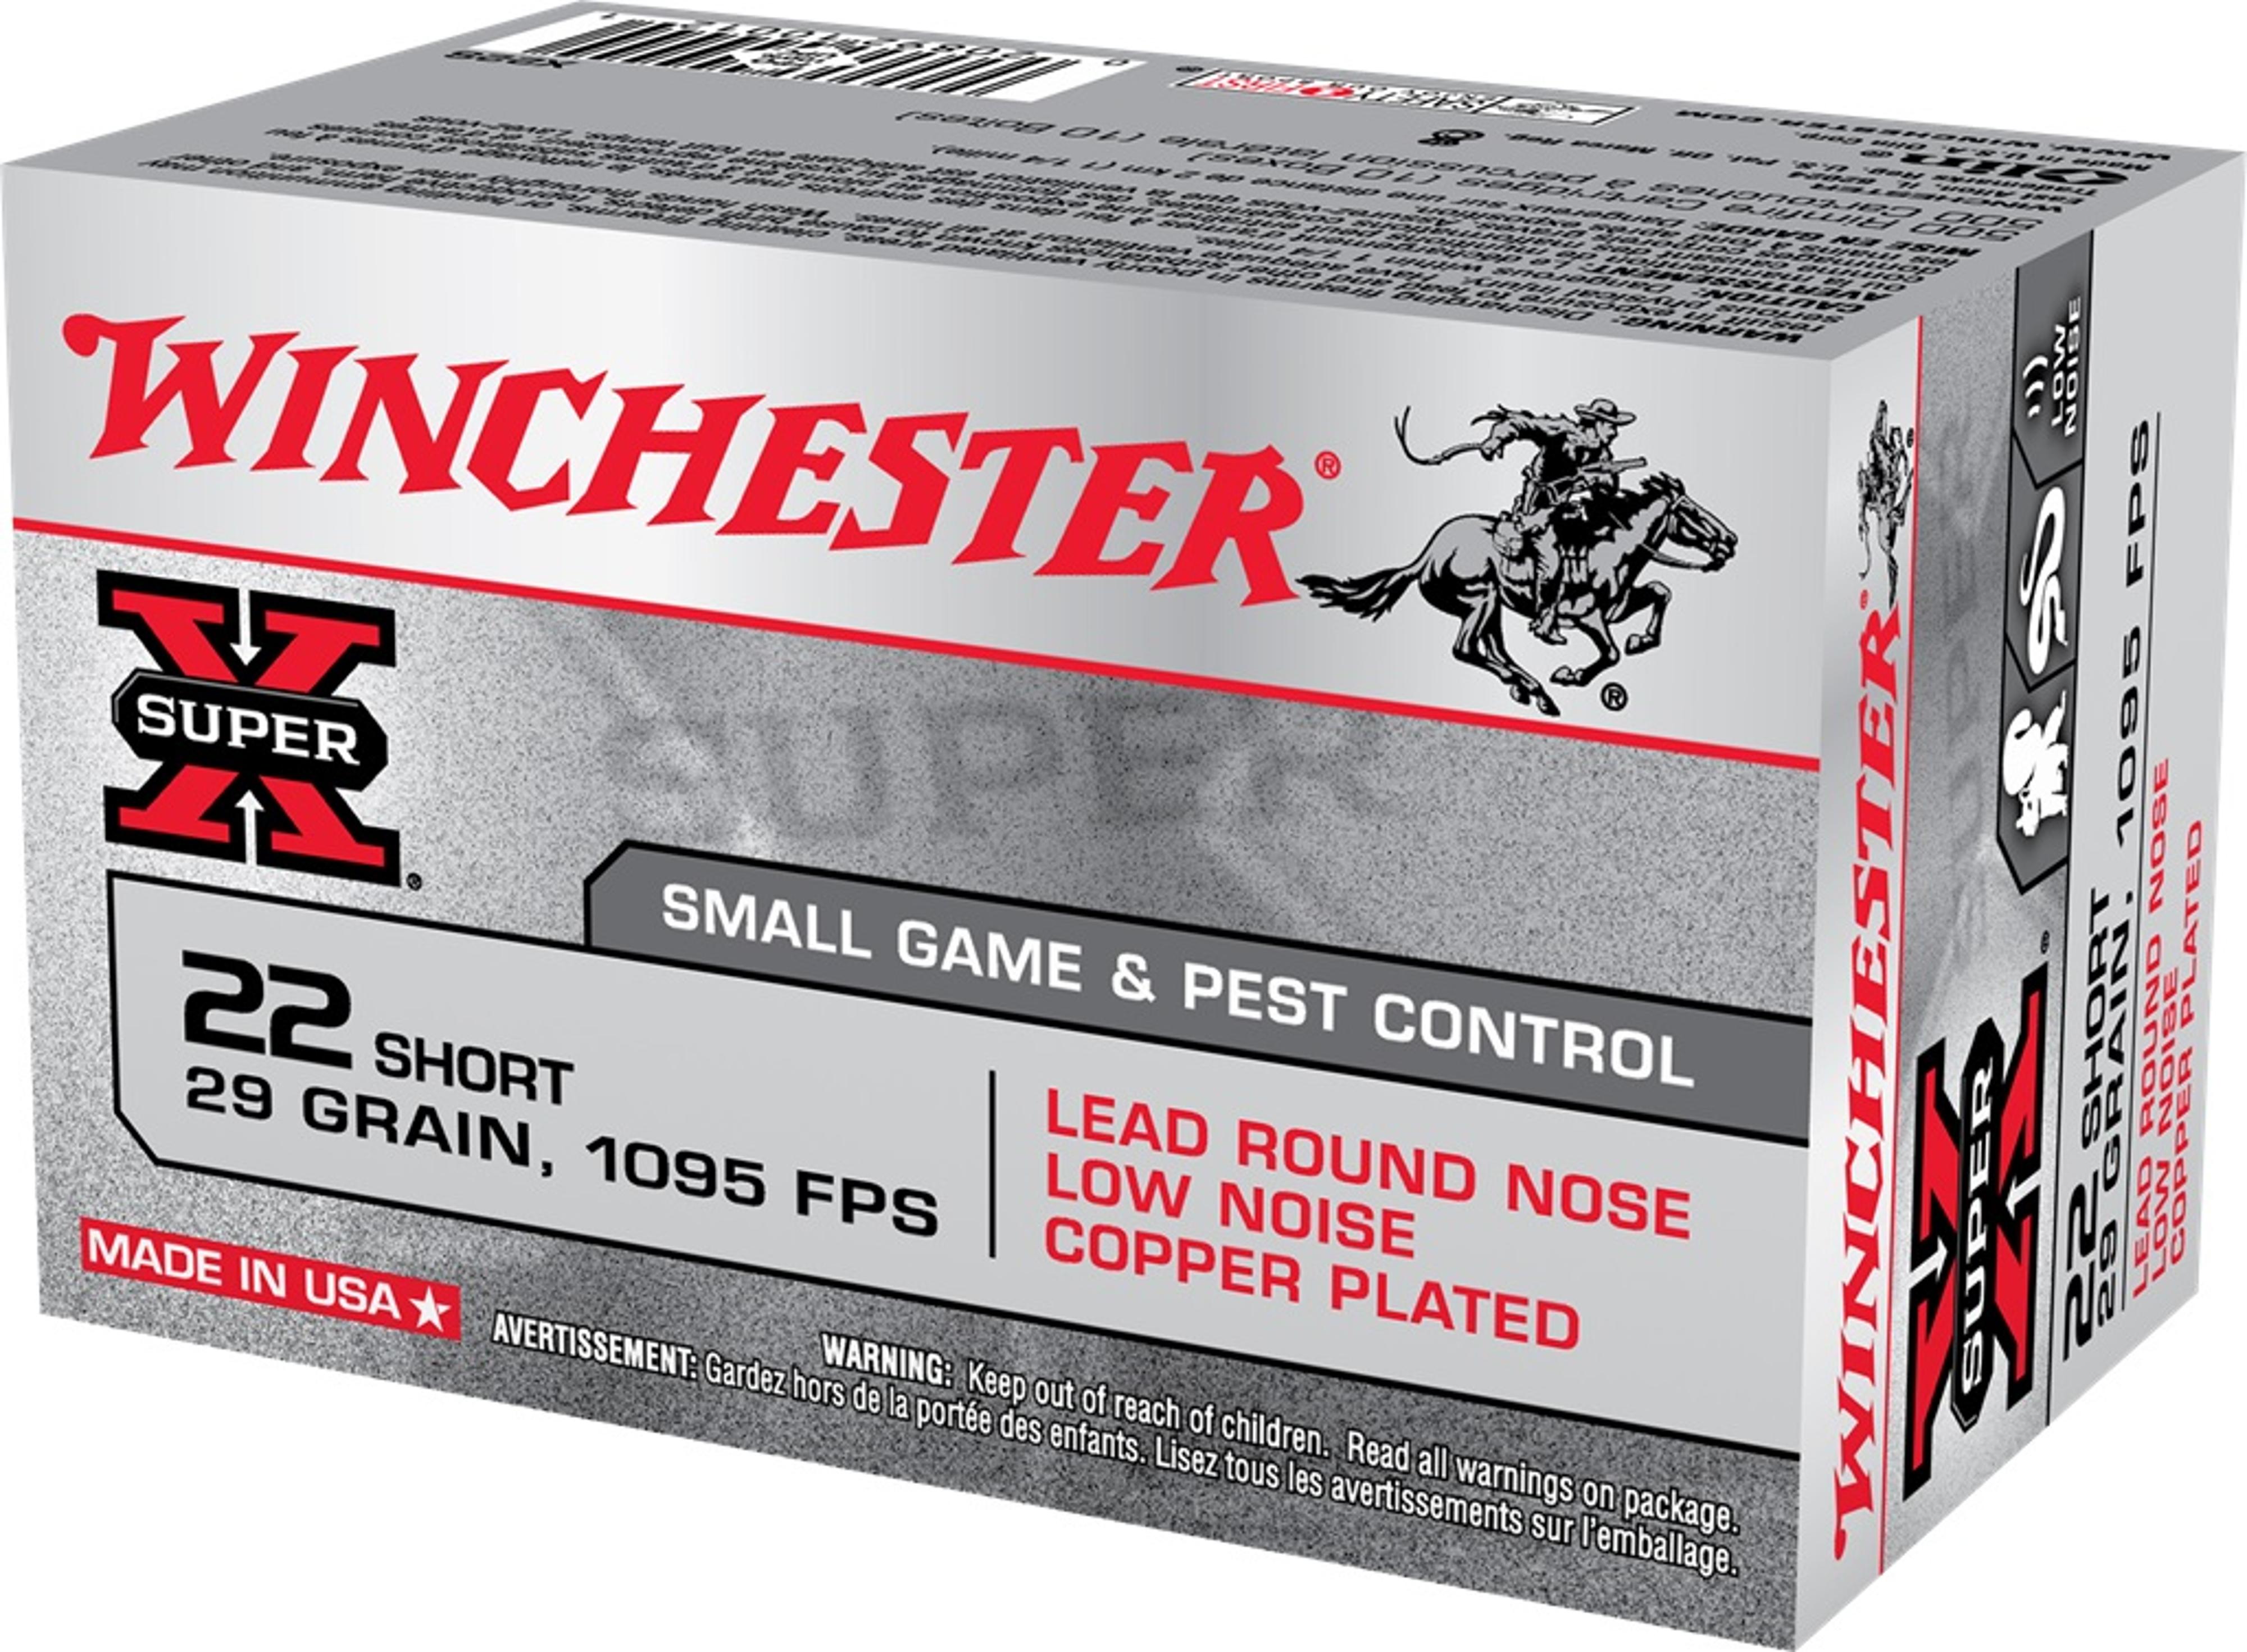 WINCHESTER: Super-X 22 Short, 29gr Copper Plated Round Nose, 1095 FPS